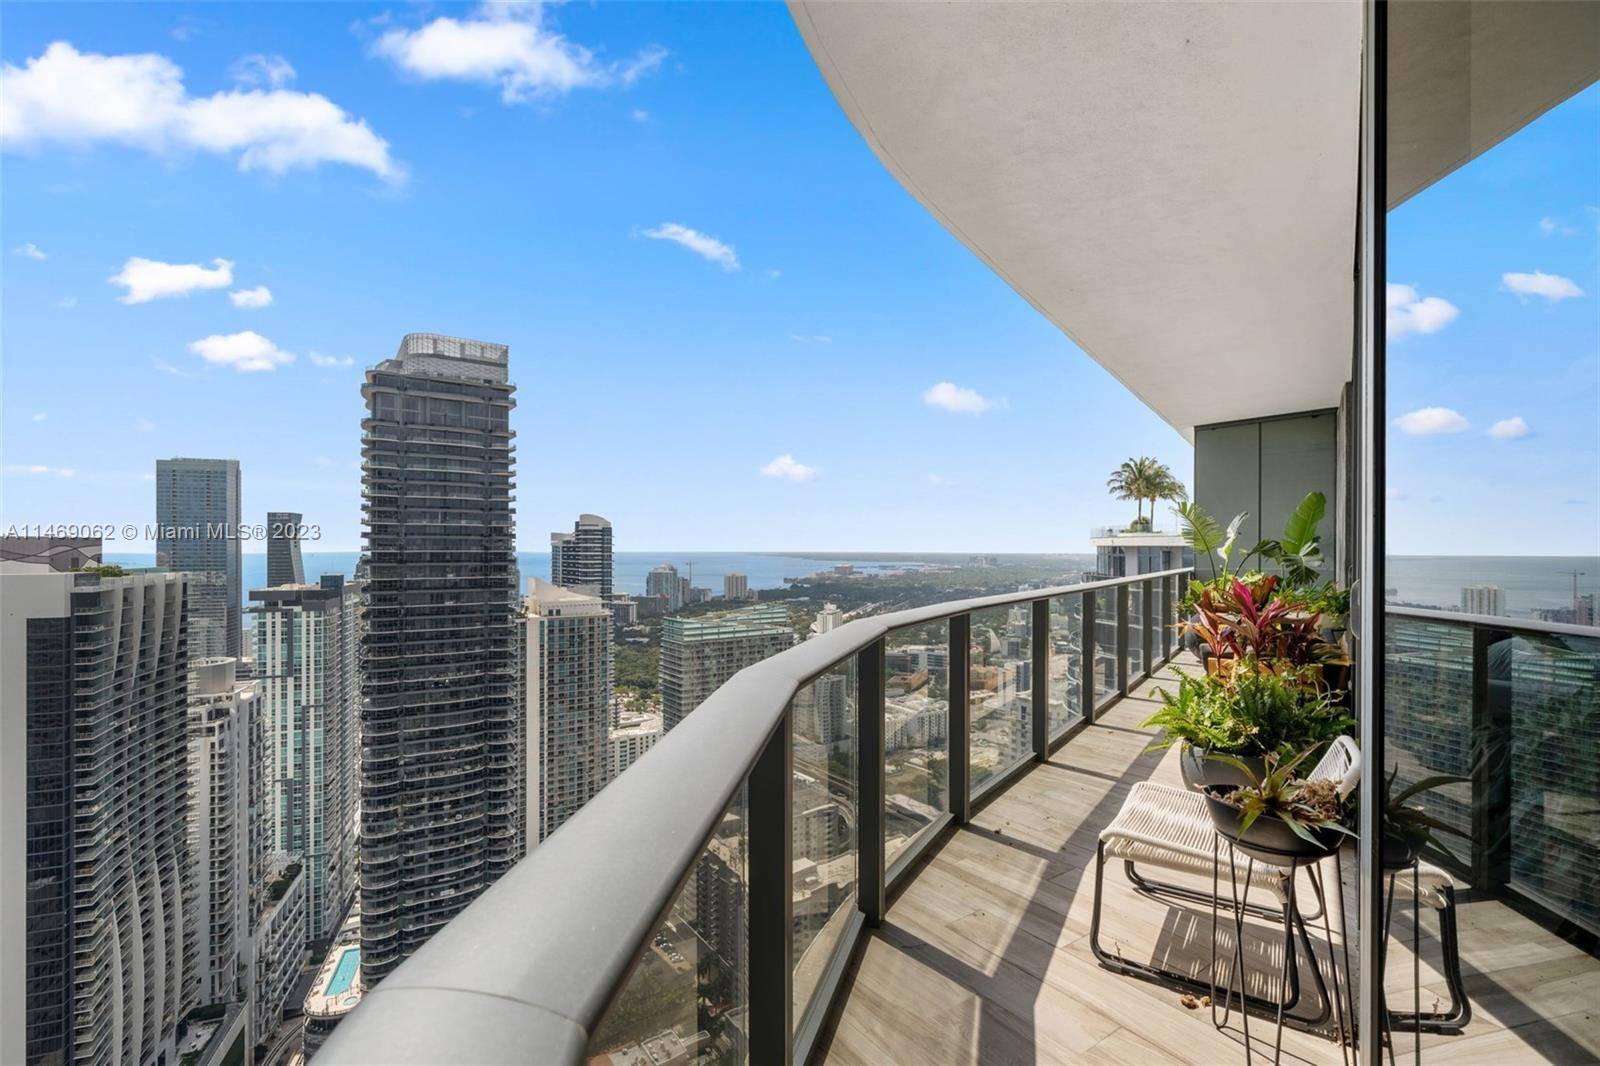 Spectacular 4Bed 4. 5 Bath Corner unit, open floor plan, floor to ceiling walls, 2 master suites, spacious living areas, wrapped around balcony with breathtaking city bay views at SLS ...